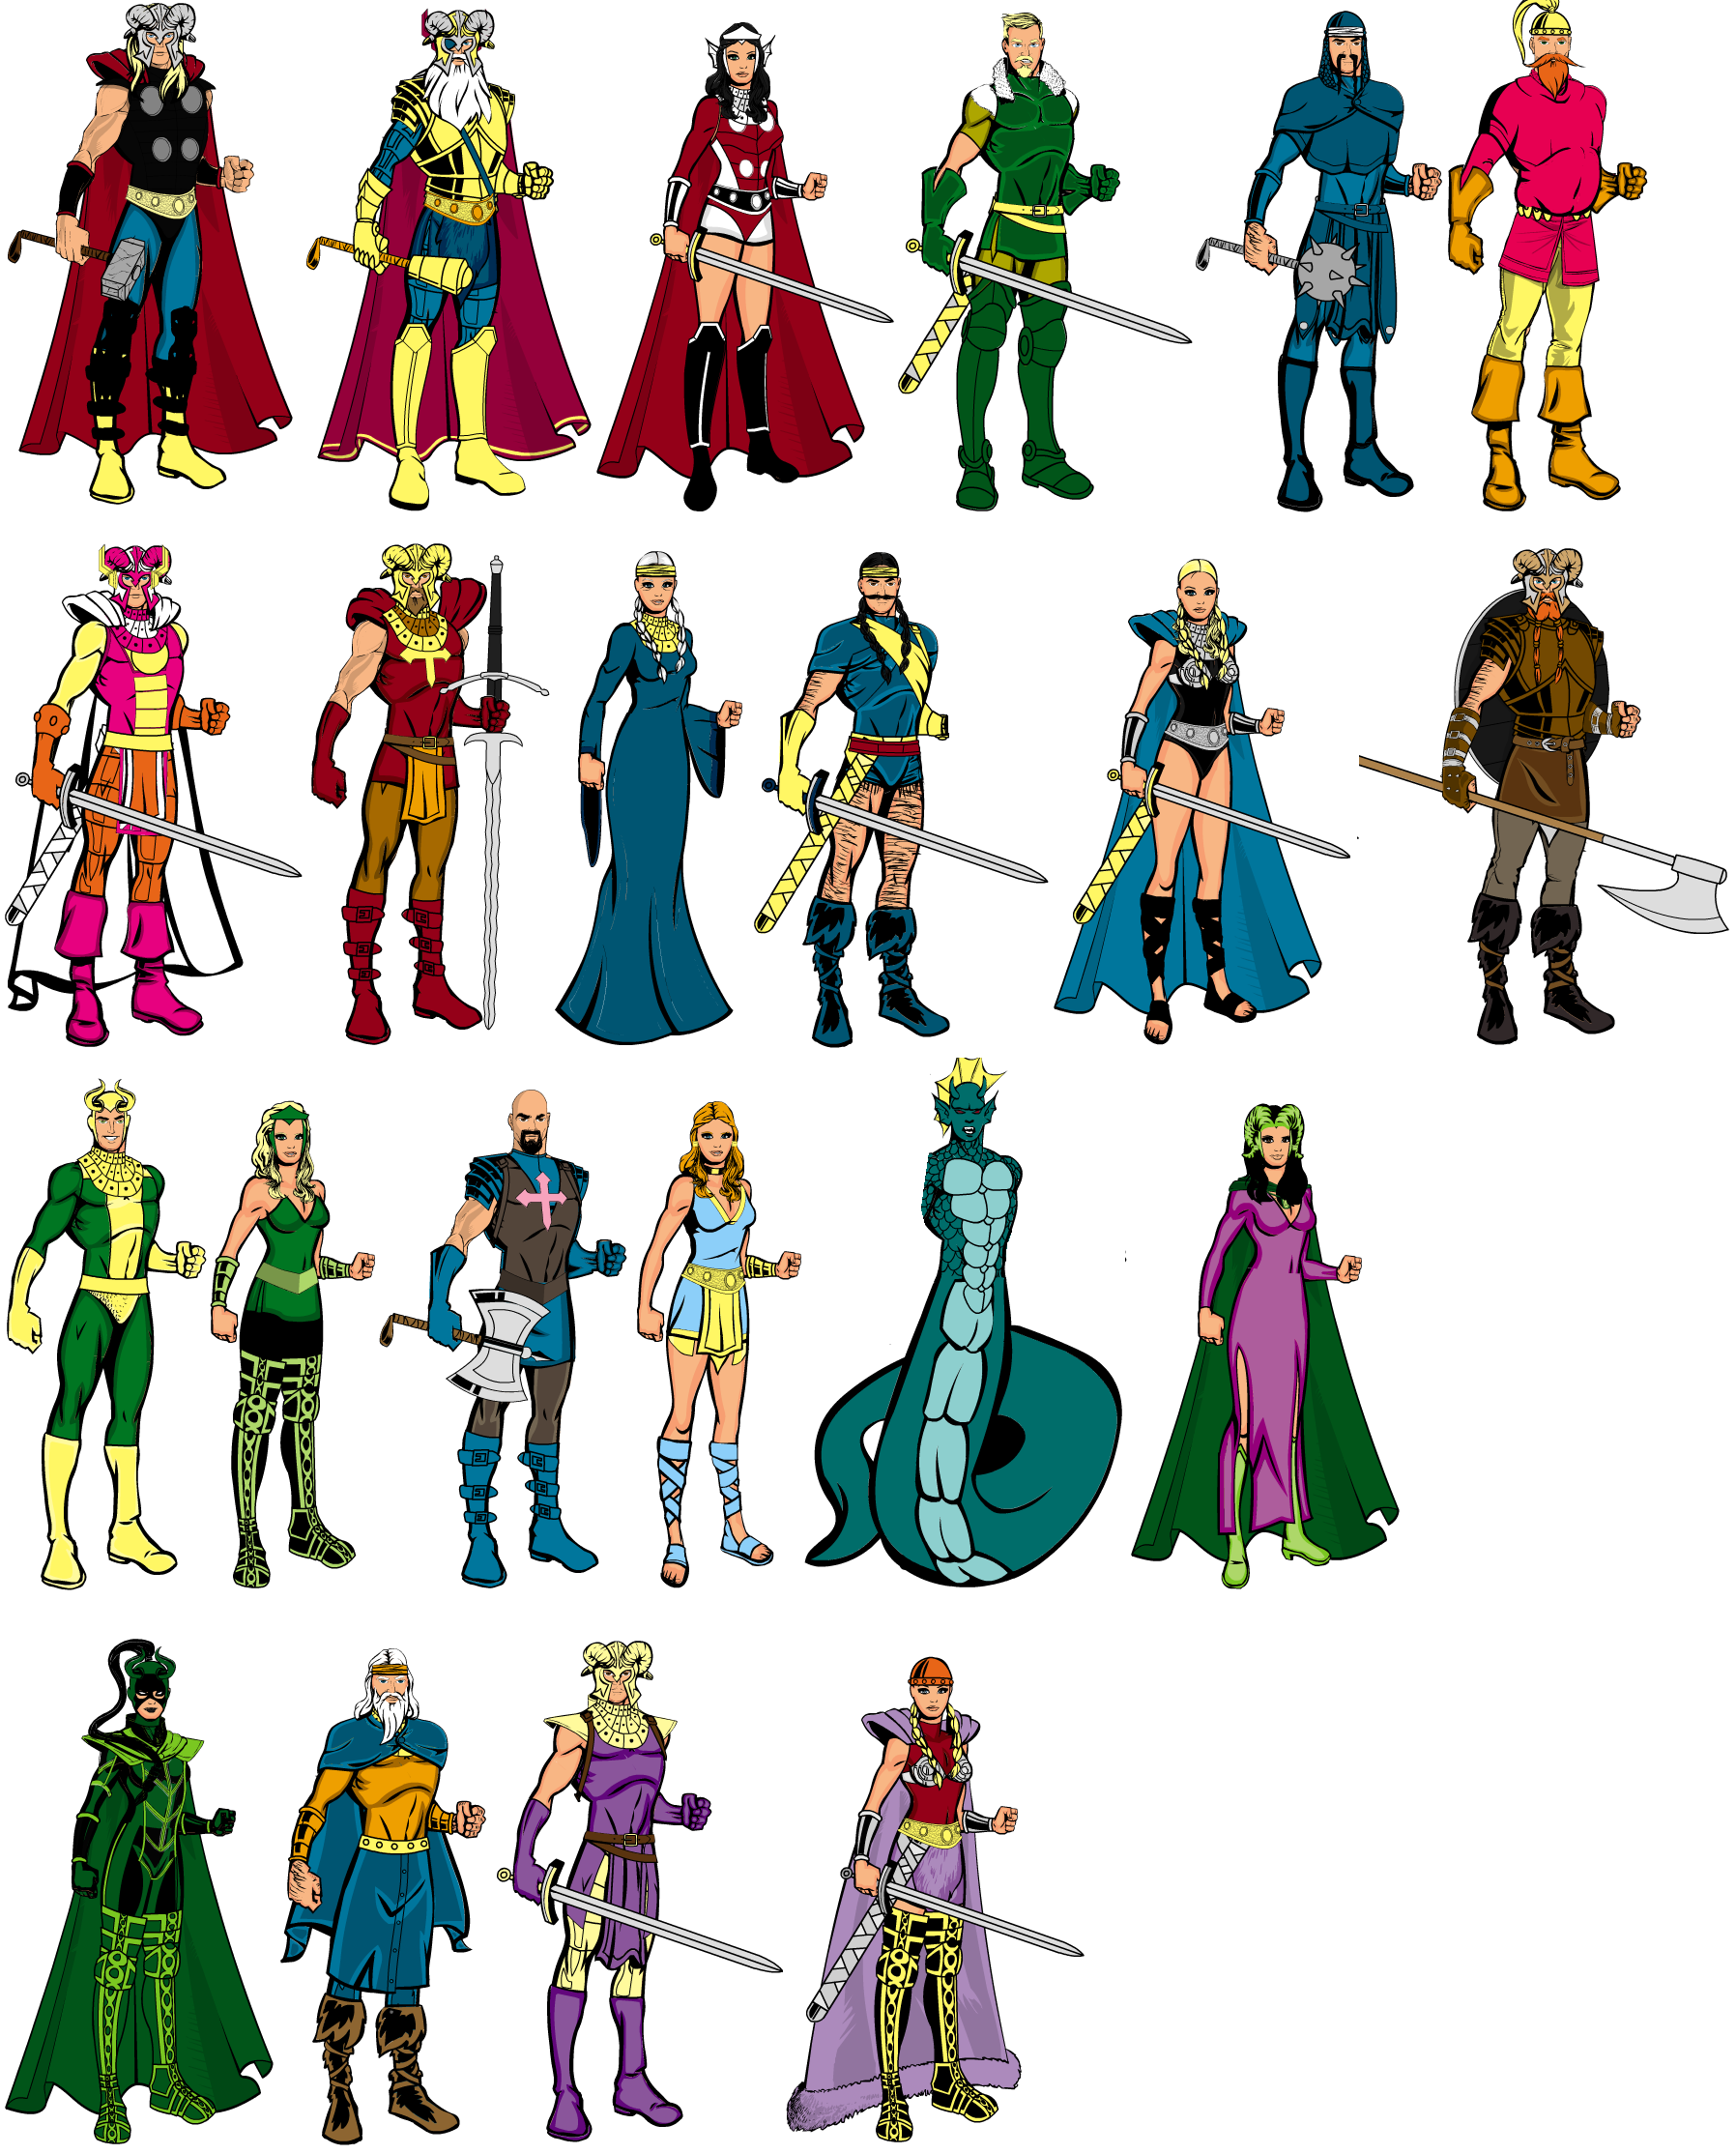 The 7 God Warriors in Asgard! by RPGHunter on DeviantArt